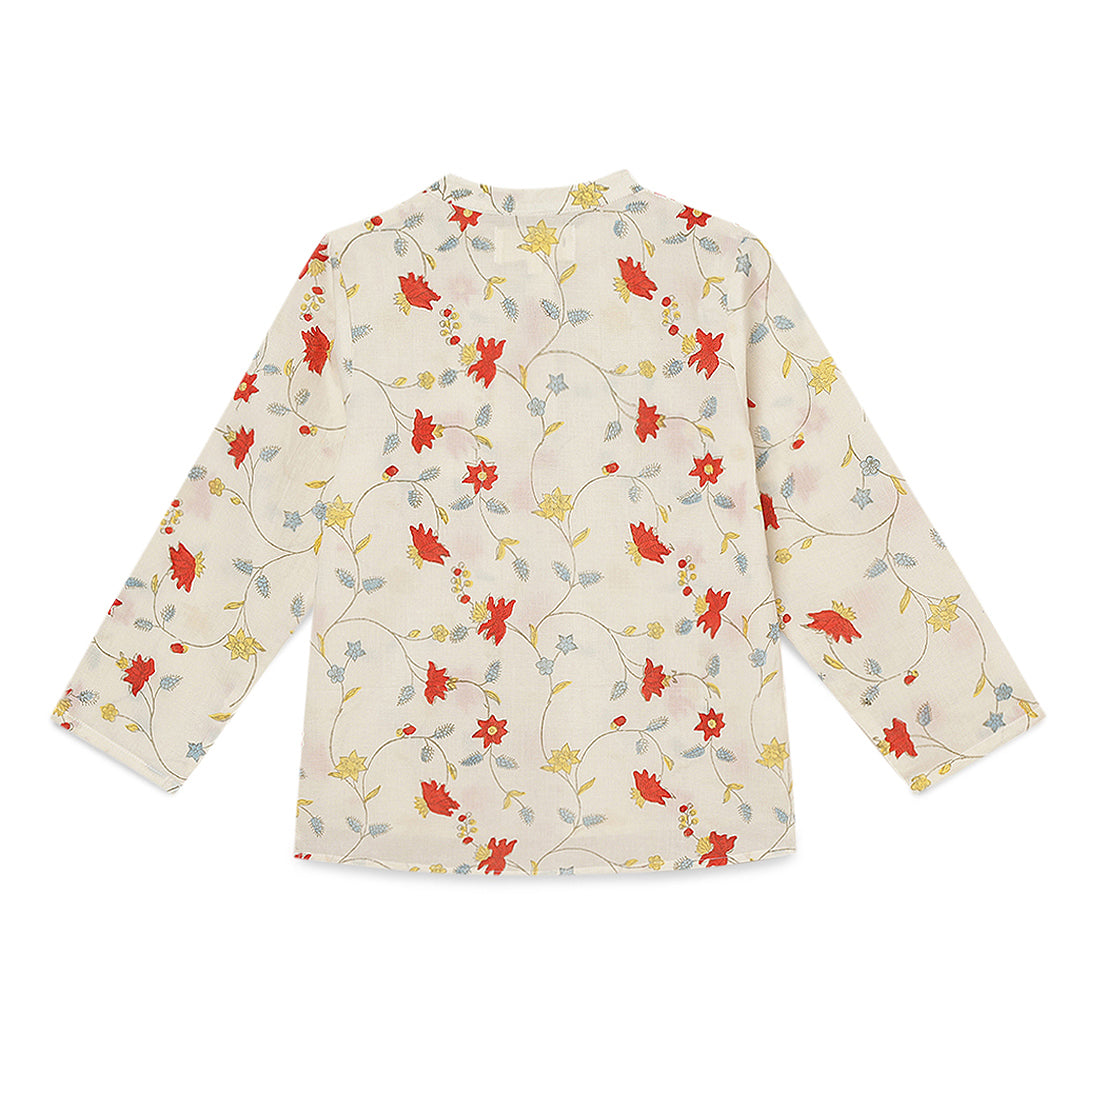 Boys Cotton full sleeves shirt with Poppy print 2yrs to 6 yrs -Back